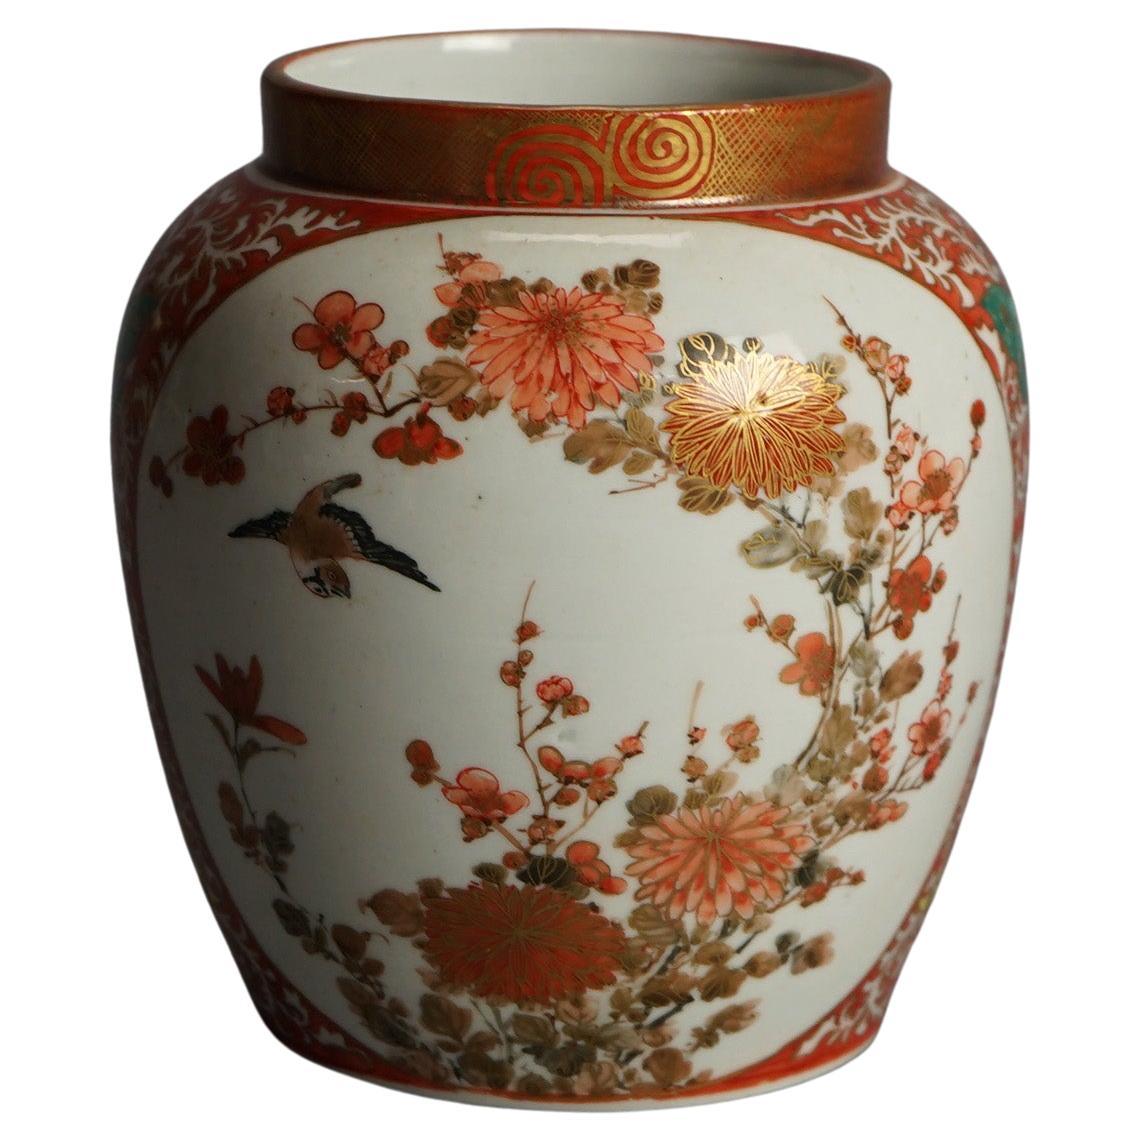 Antique Japanese Satsuma Vase with Garden Scene having Birds, Flowers & Butterflies and Gilt Highlights Throughout, C1920

Measures - 6.5